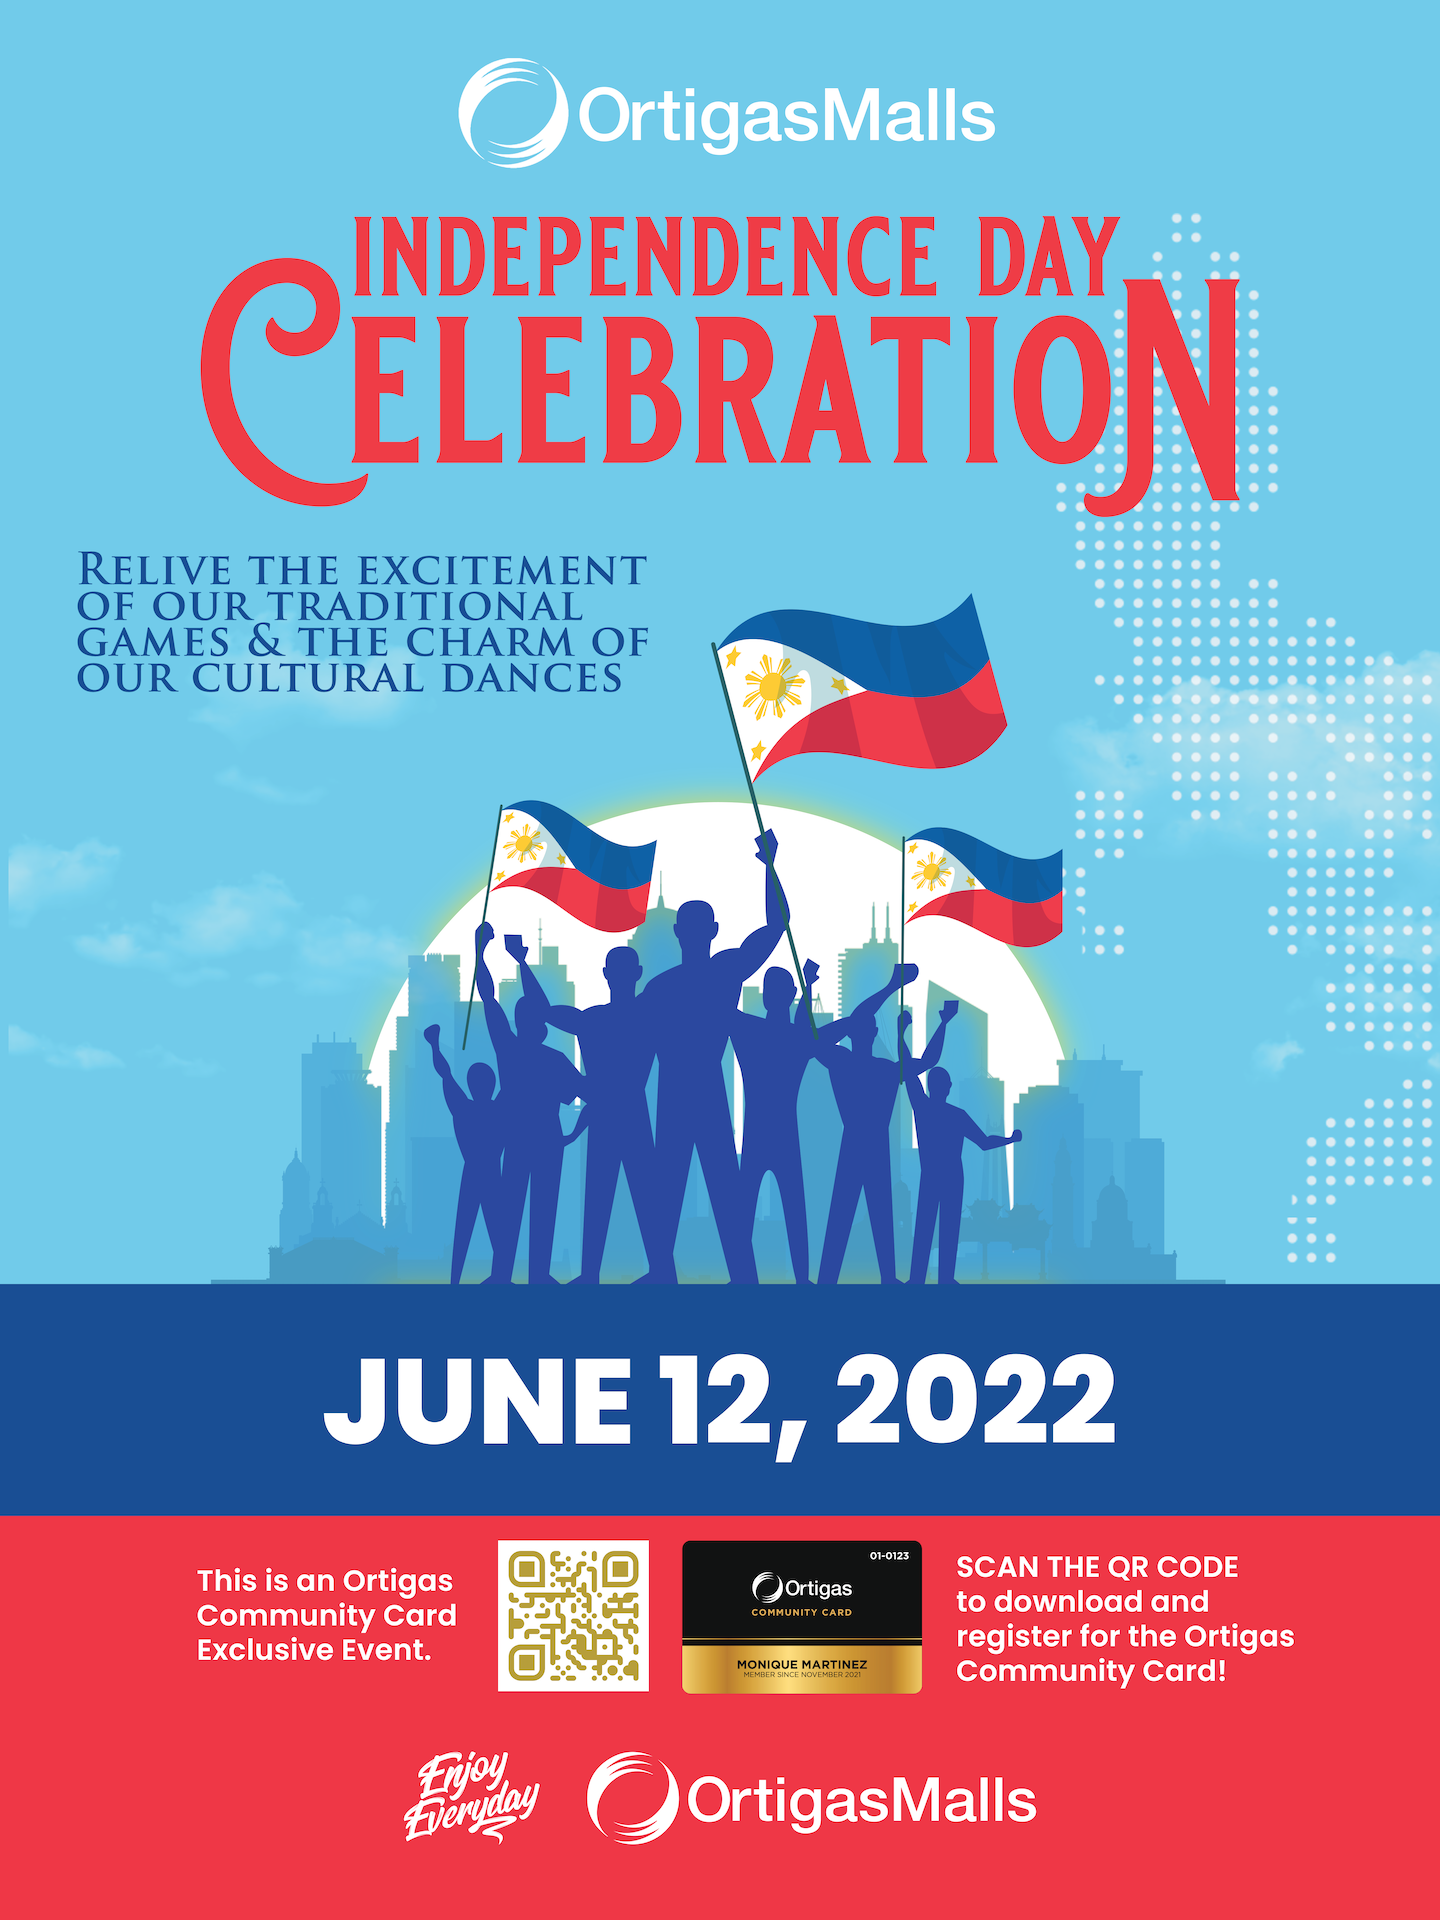 Independence Day Celebration at Ortigas Malls!